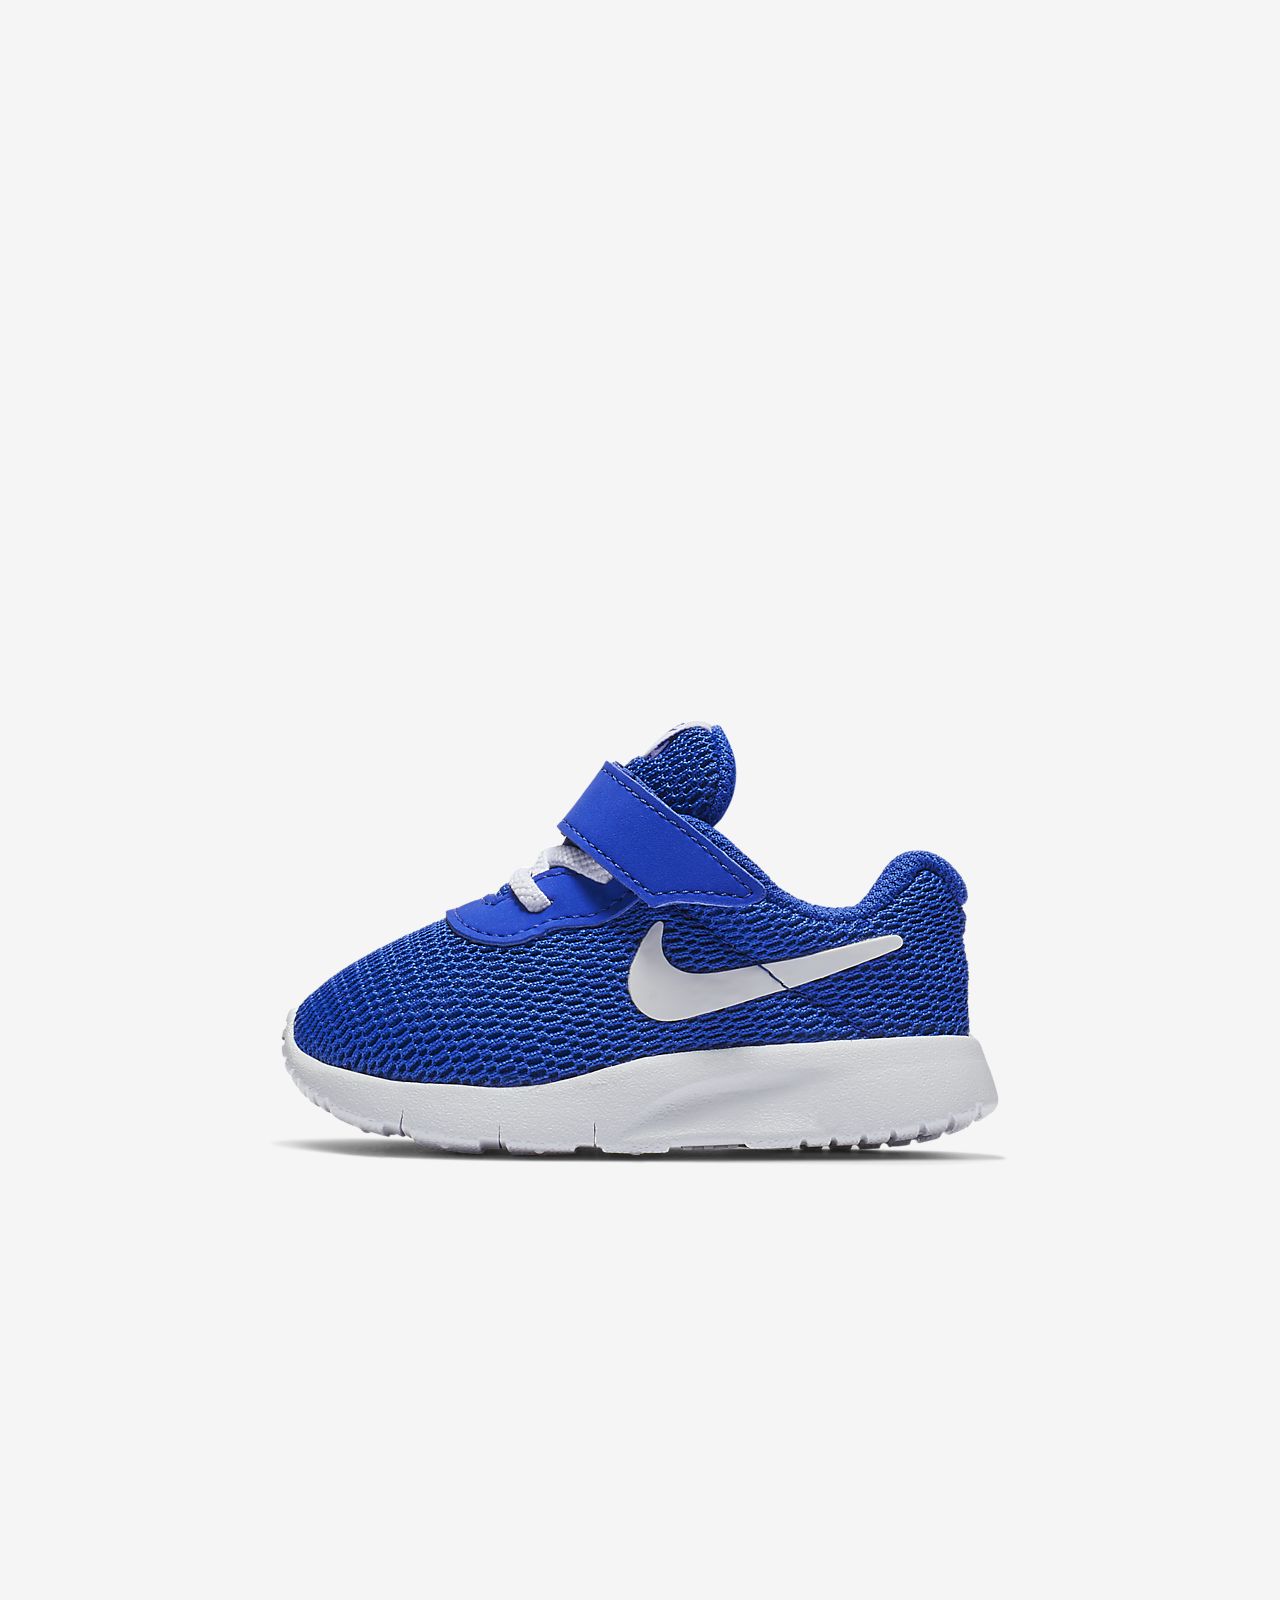 nike wide toddler shoes